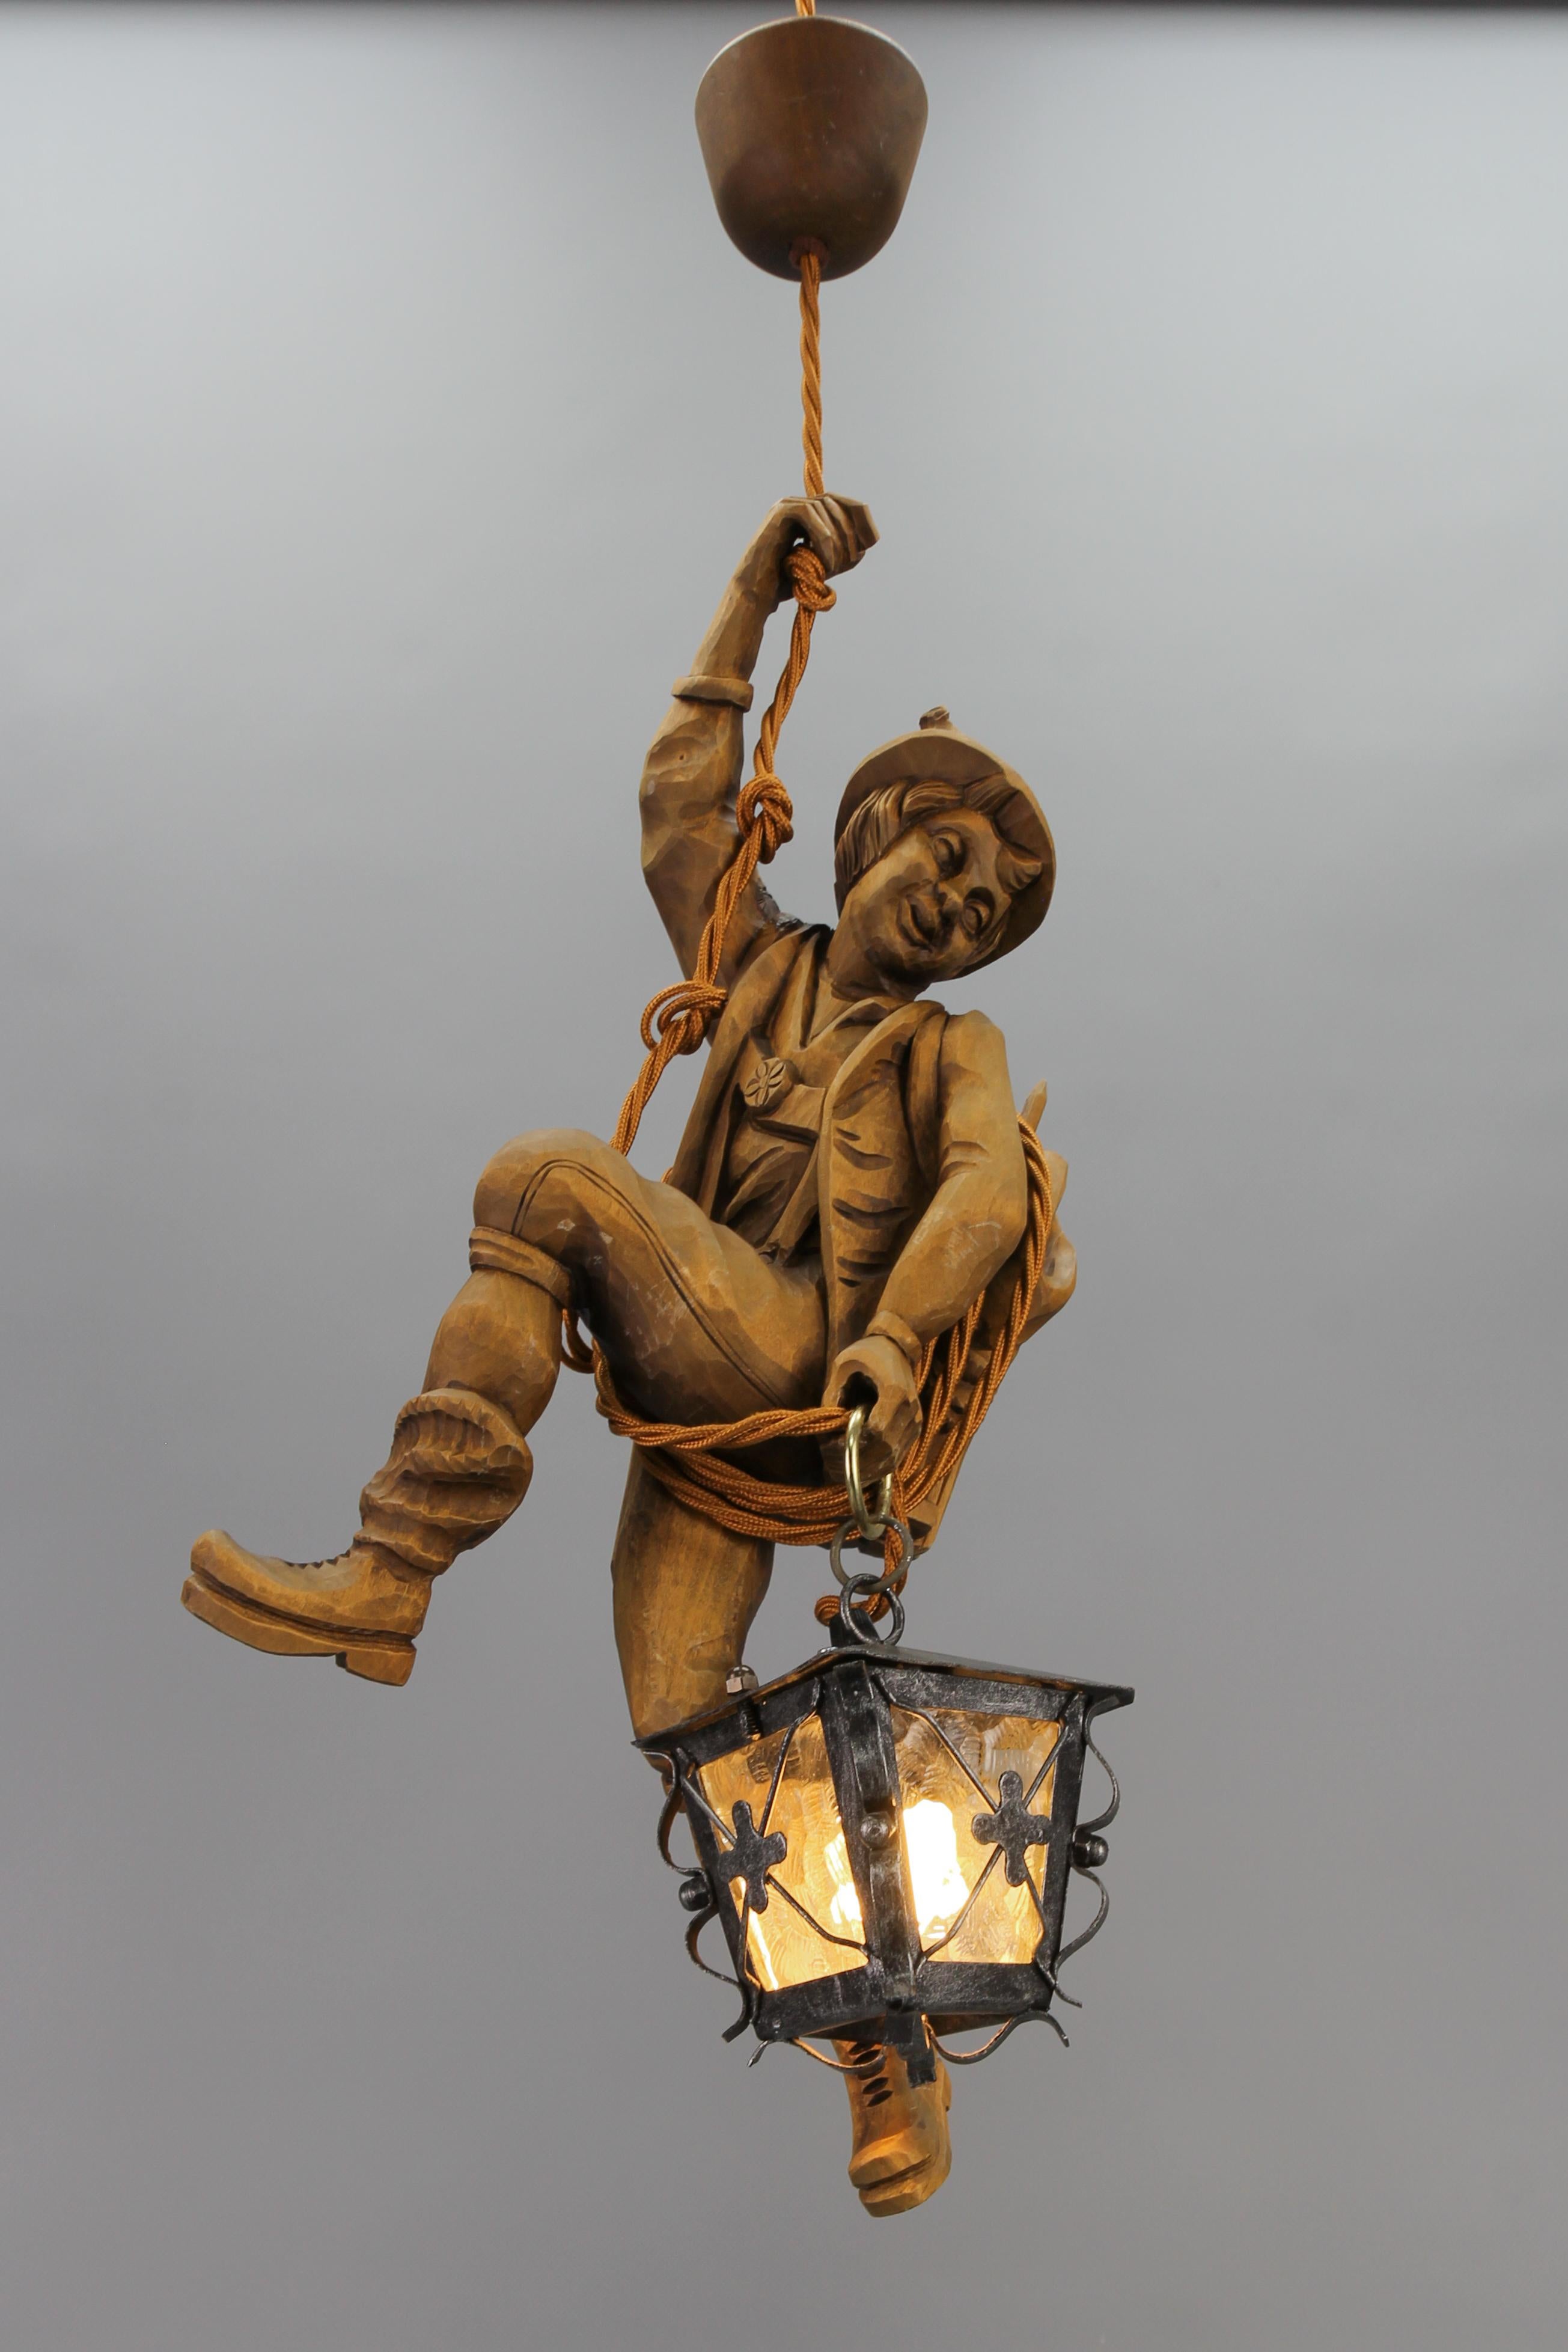 German Pendant Light with Carved Wooden Figure Mountain Climber and Lantern
This wonderful German figural pendant lamp features a hand-carved linden wood figure of a smiling mountain climber. The detailed wooden mountaineer is holding onto a rope